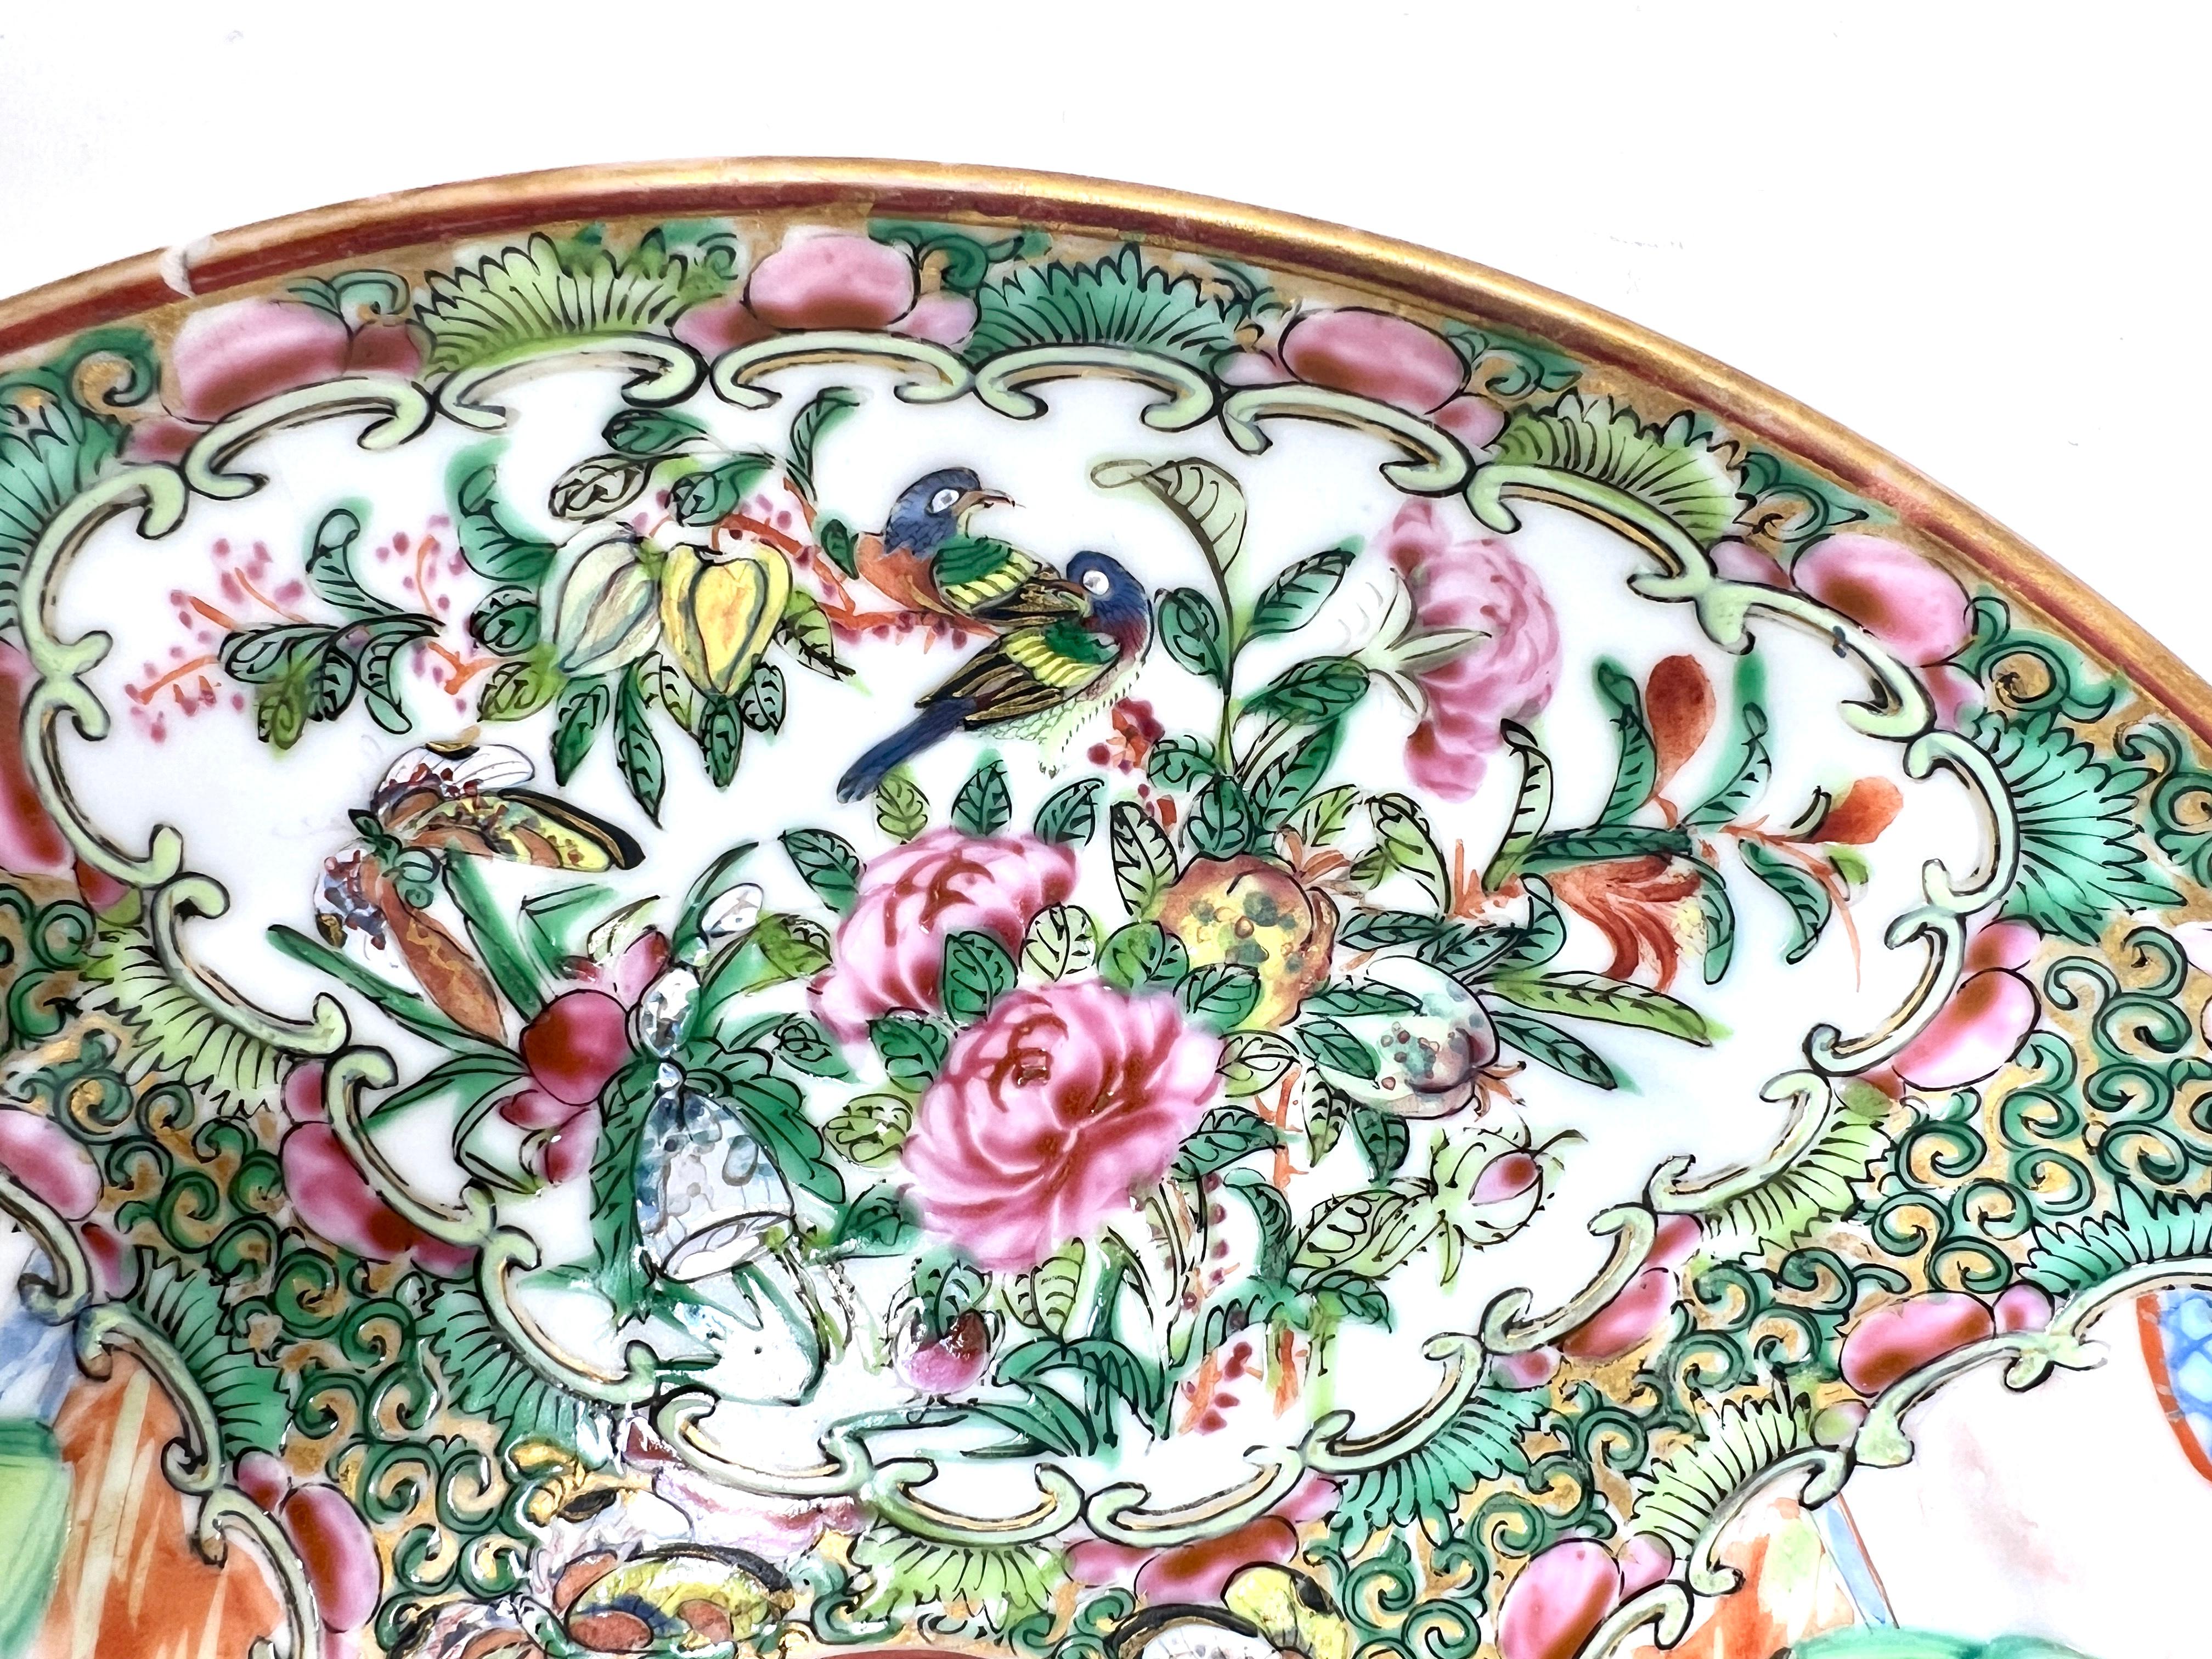 Antique Chinese Famille Rose Porcelain Plate, Circa 1880-1890. For Sale 1